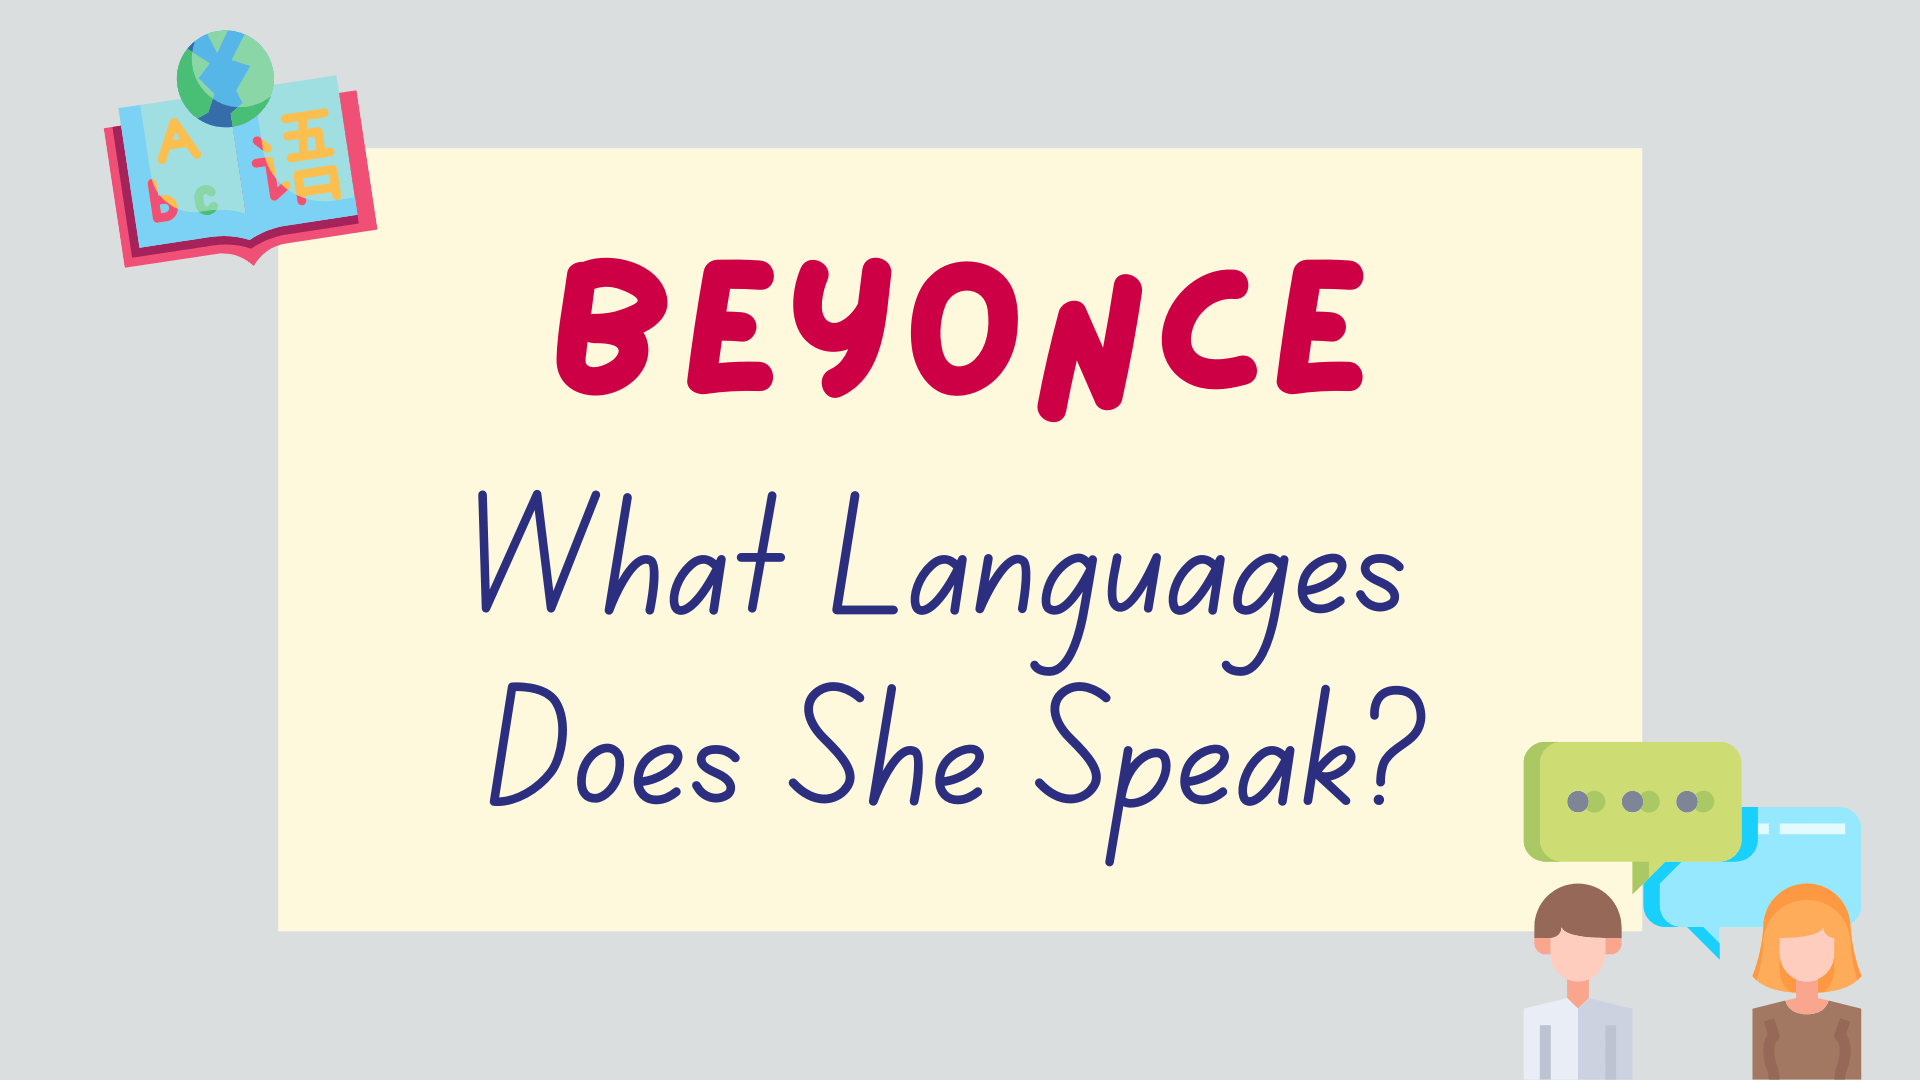 what languages does Beyonce speak - featured image